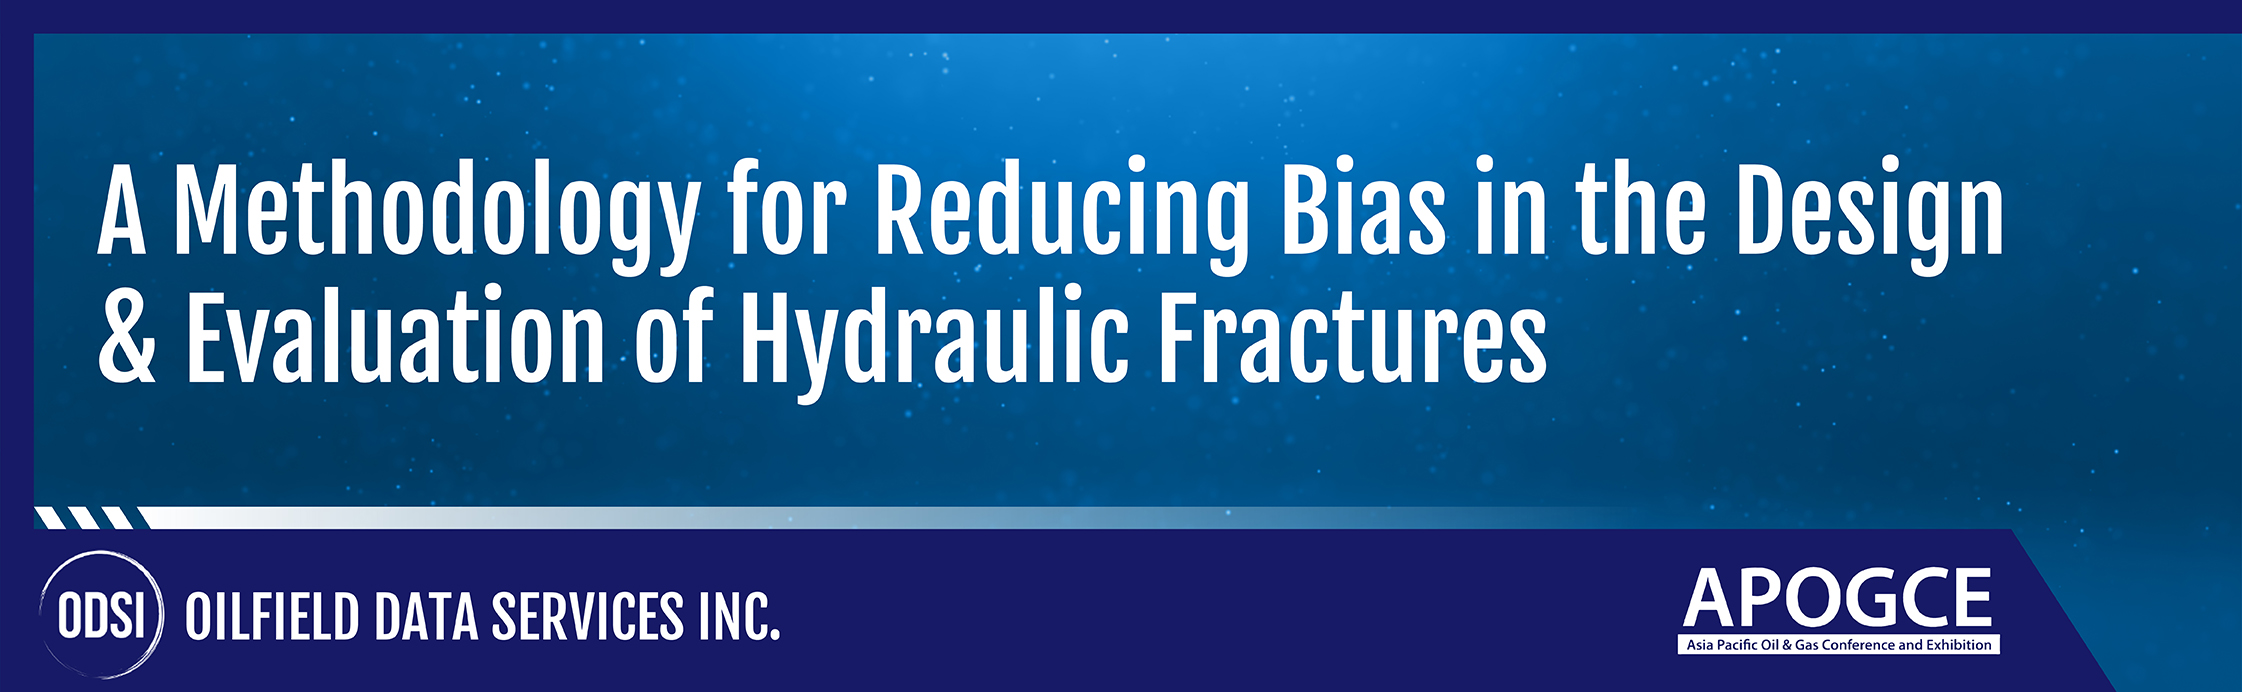 Methodology for reducing bias in the design evaluation of hydraulic fractures